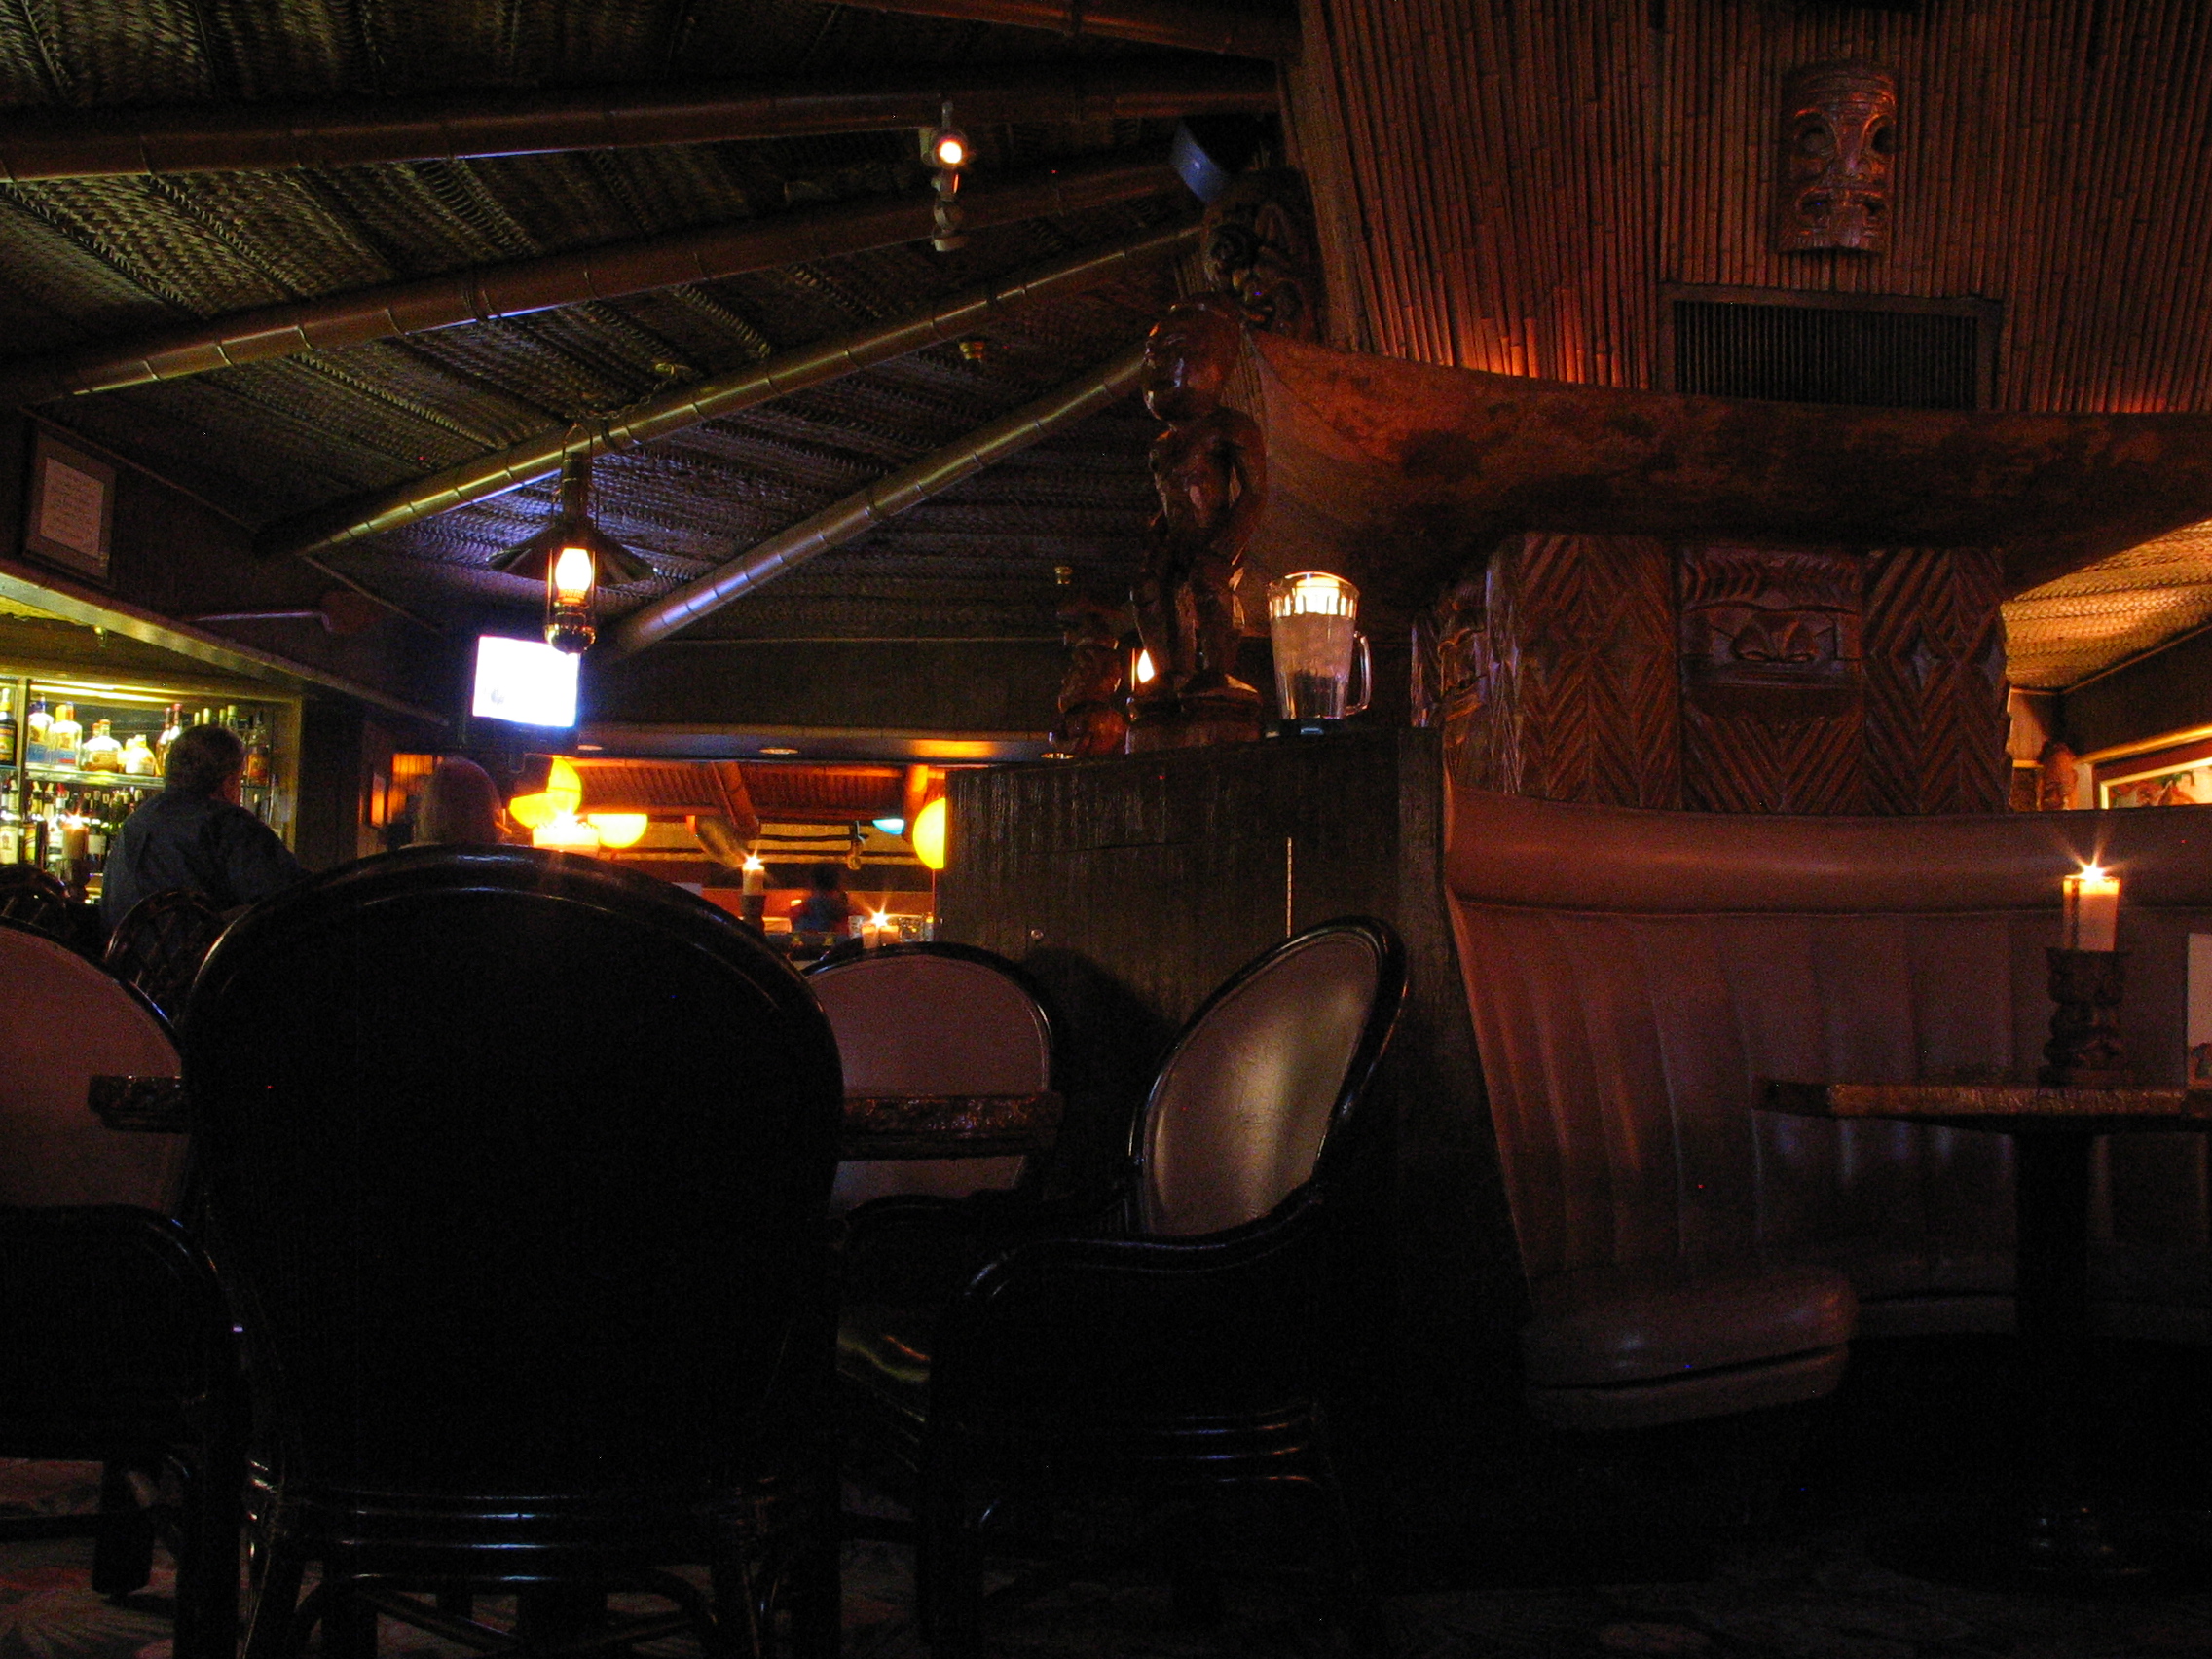 Note the back to back Tikis candleholder on the table across from us.